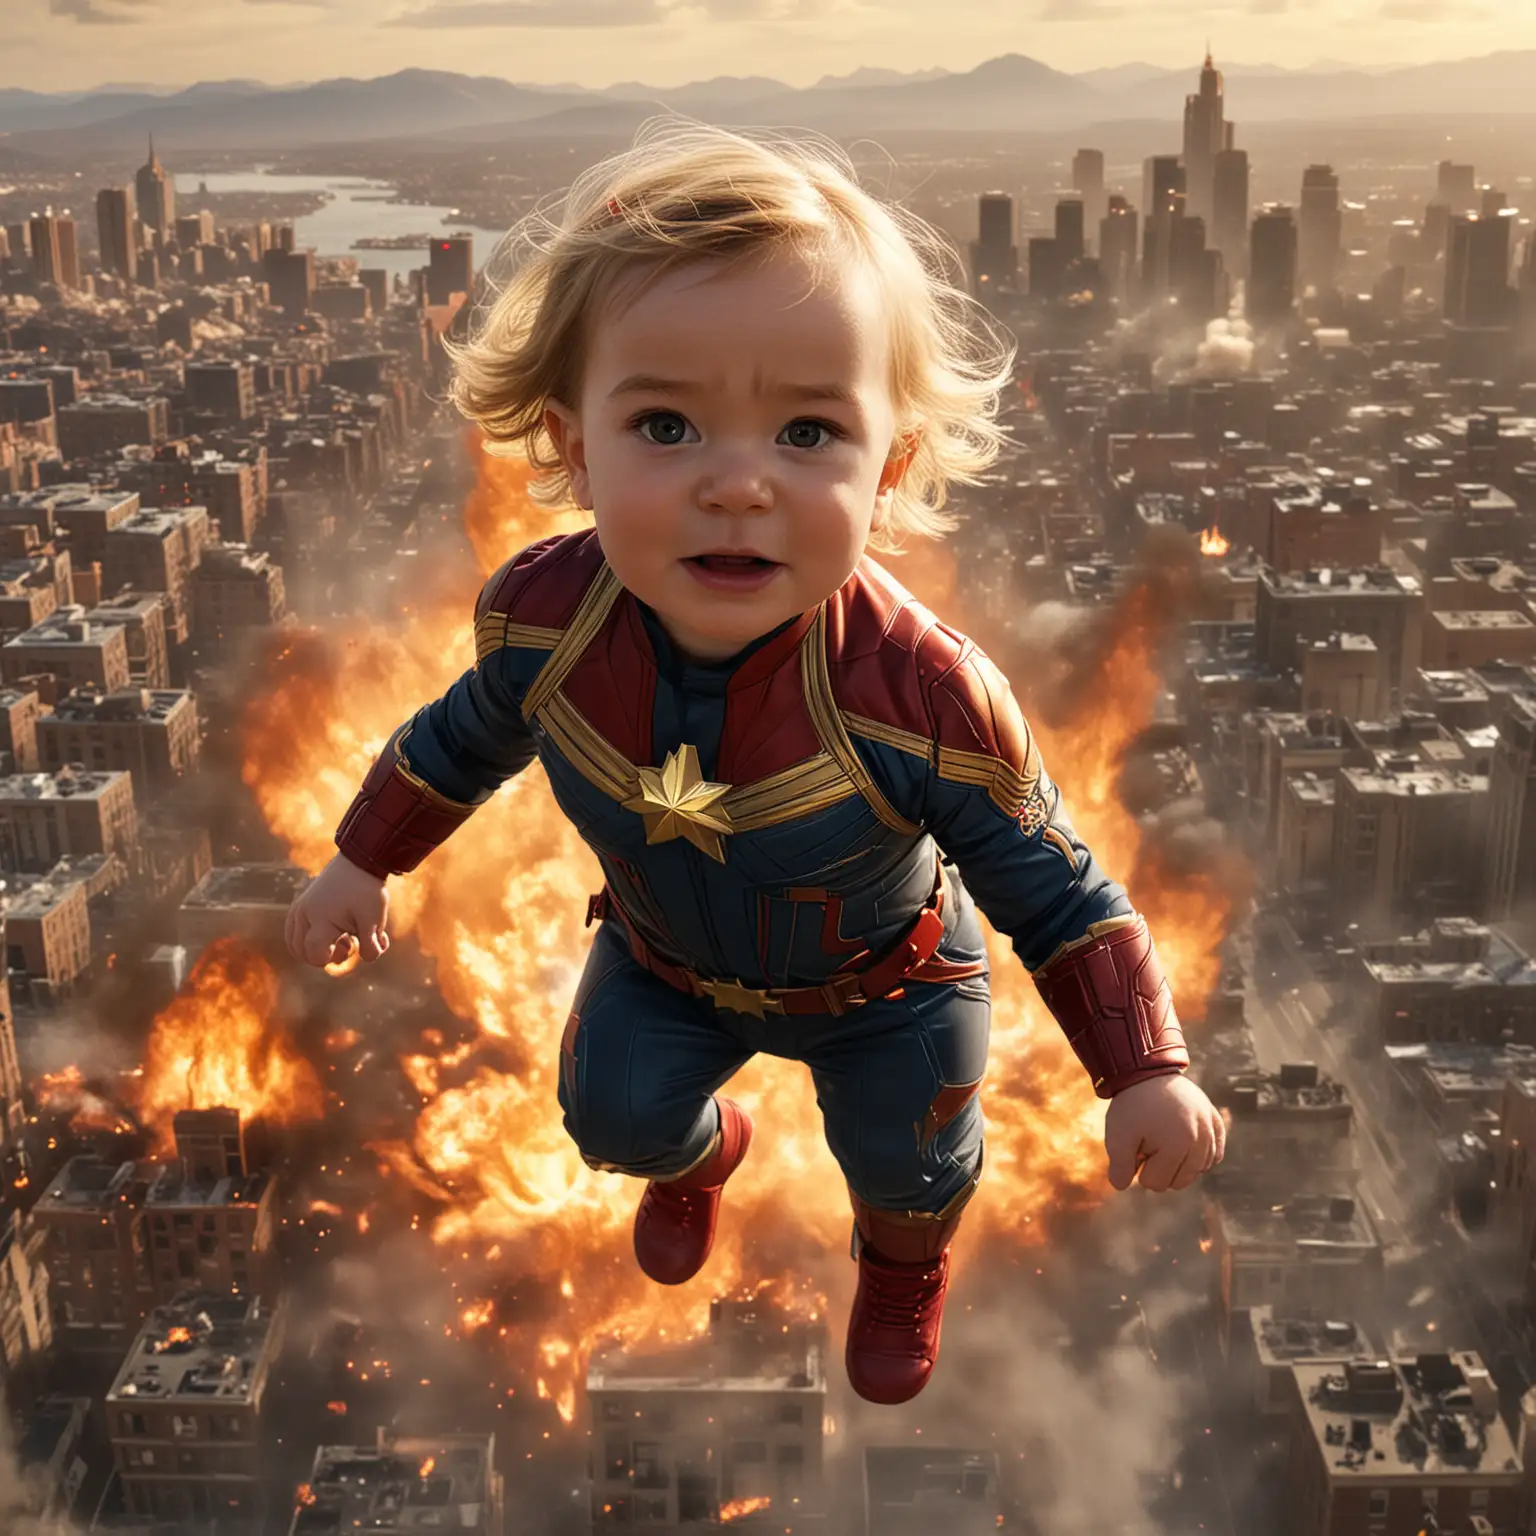 a two-year-old baby in Captain Marvel's costume flying over a burning city